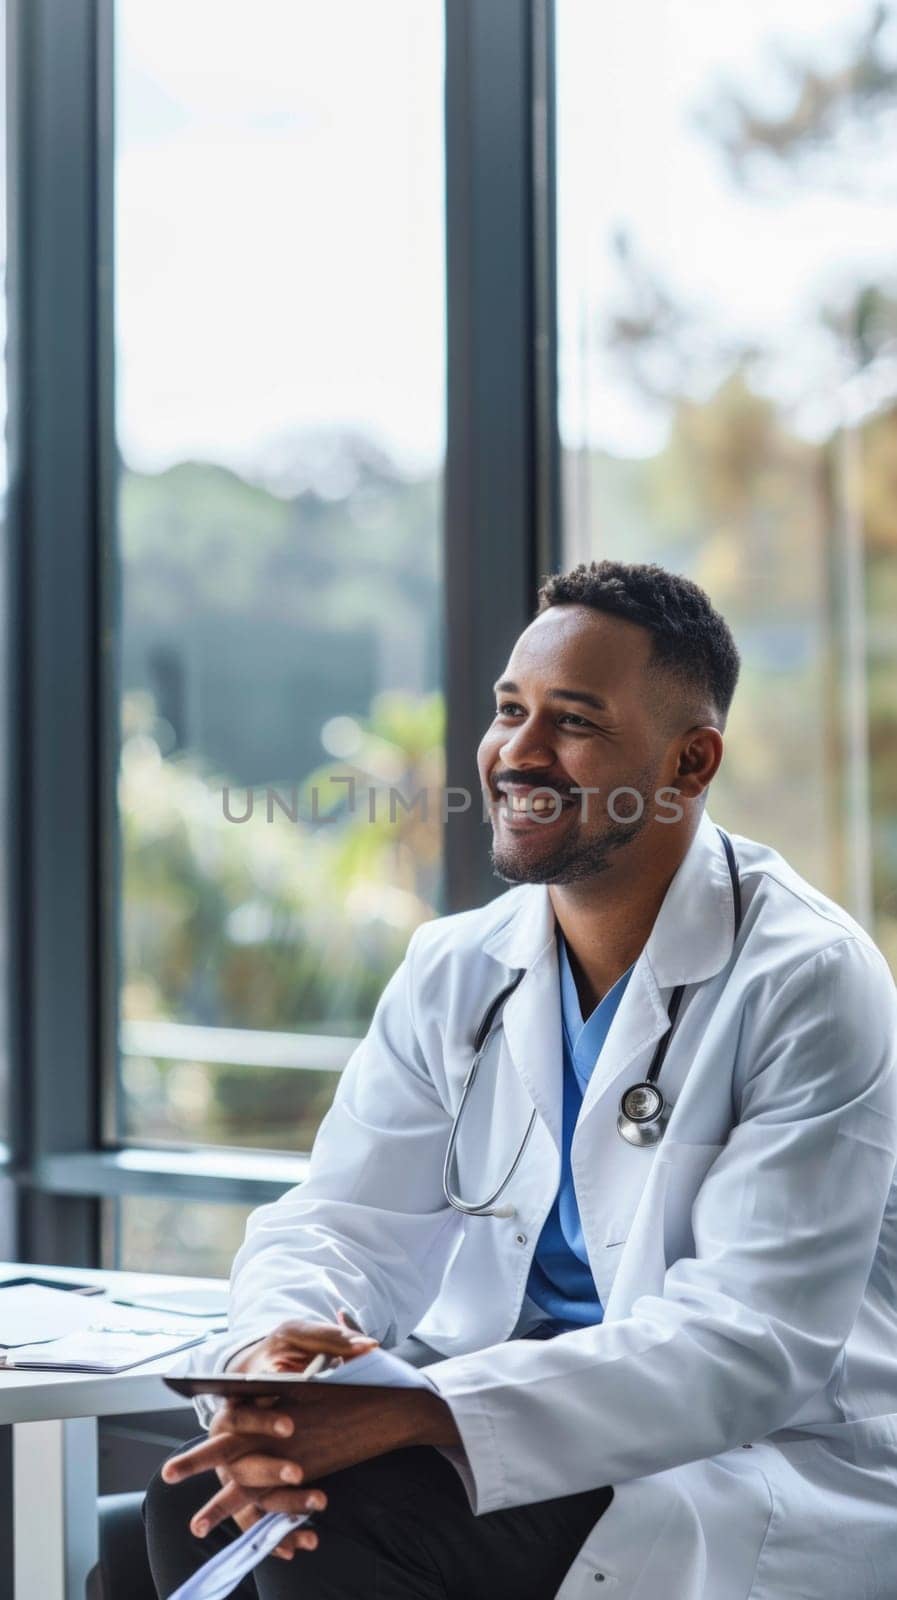 A smiling black male doctor sits at a desk with a clipboard in front of him. He is wearing a white lab coat and a blue shirt